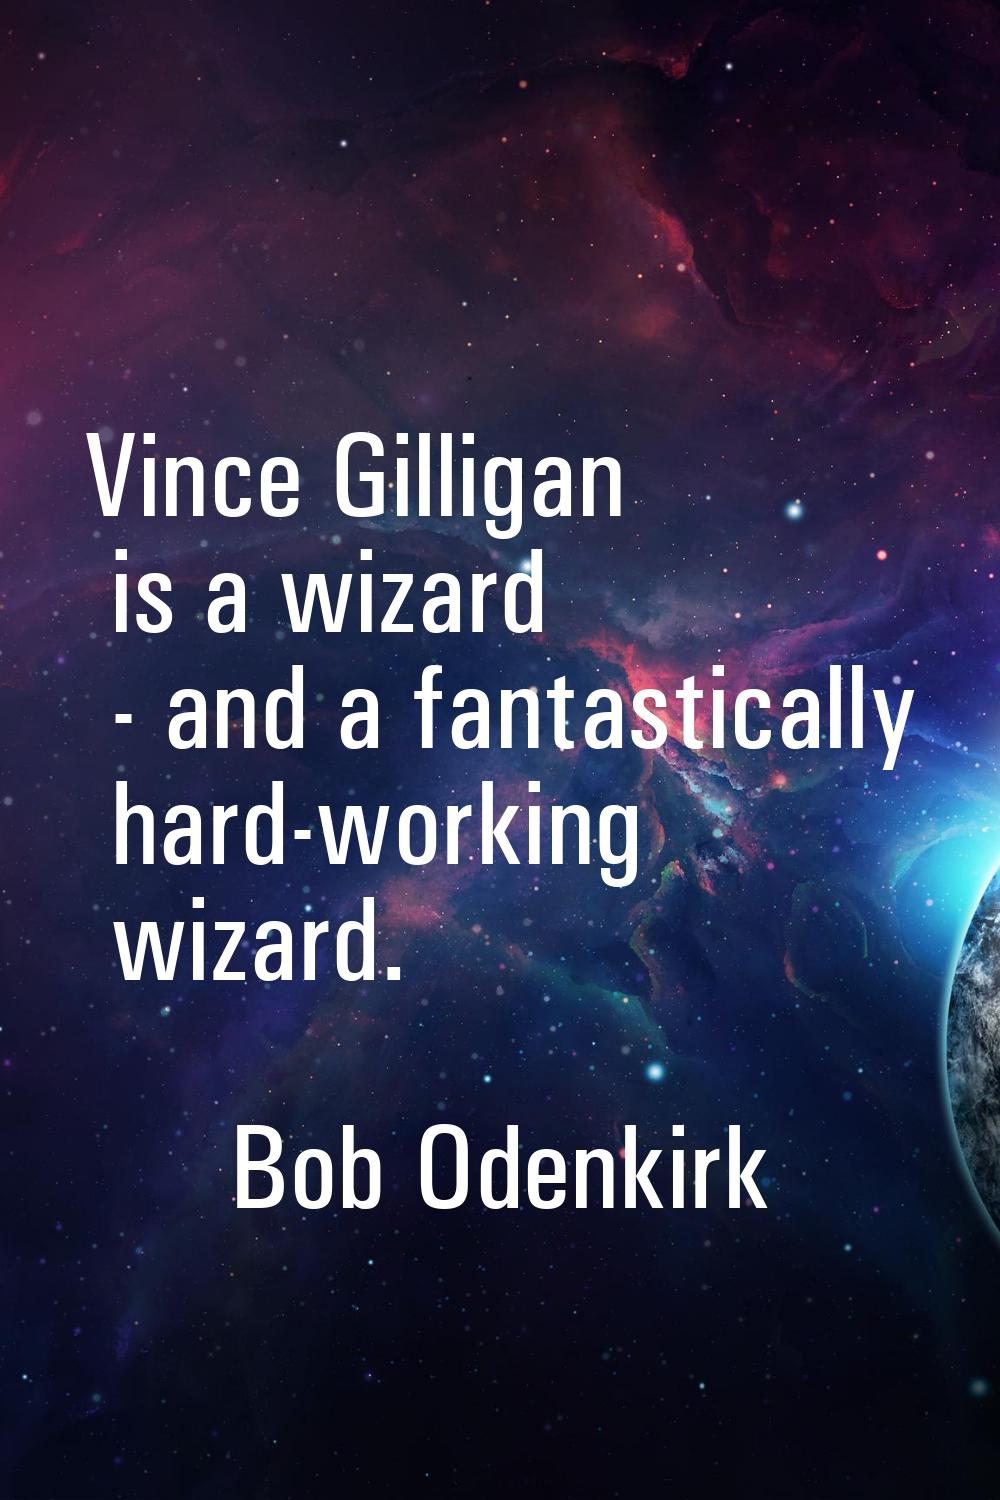 Vince Gilligan is a wizard - and a fantastically hard-working wizard.